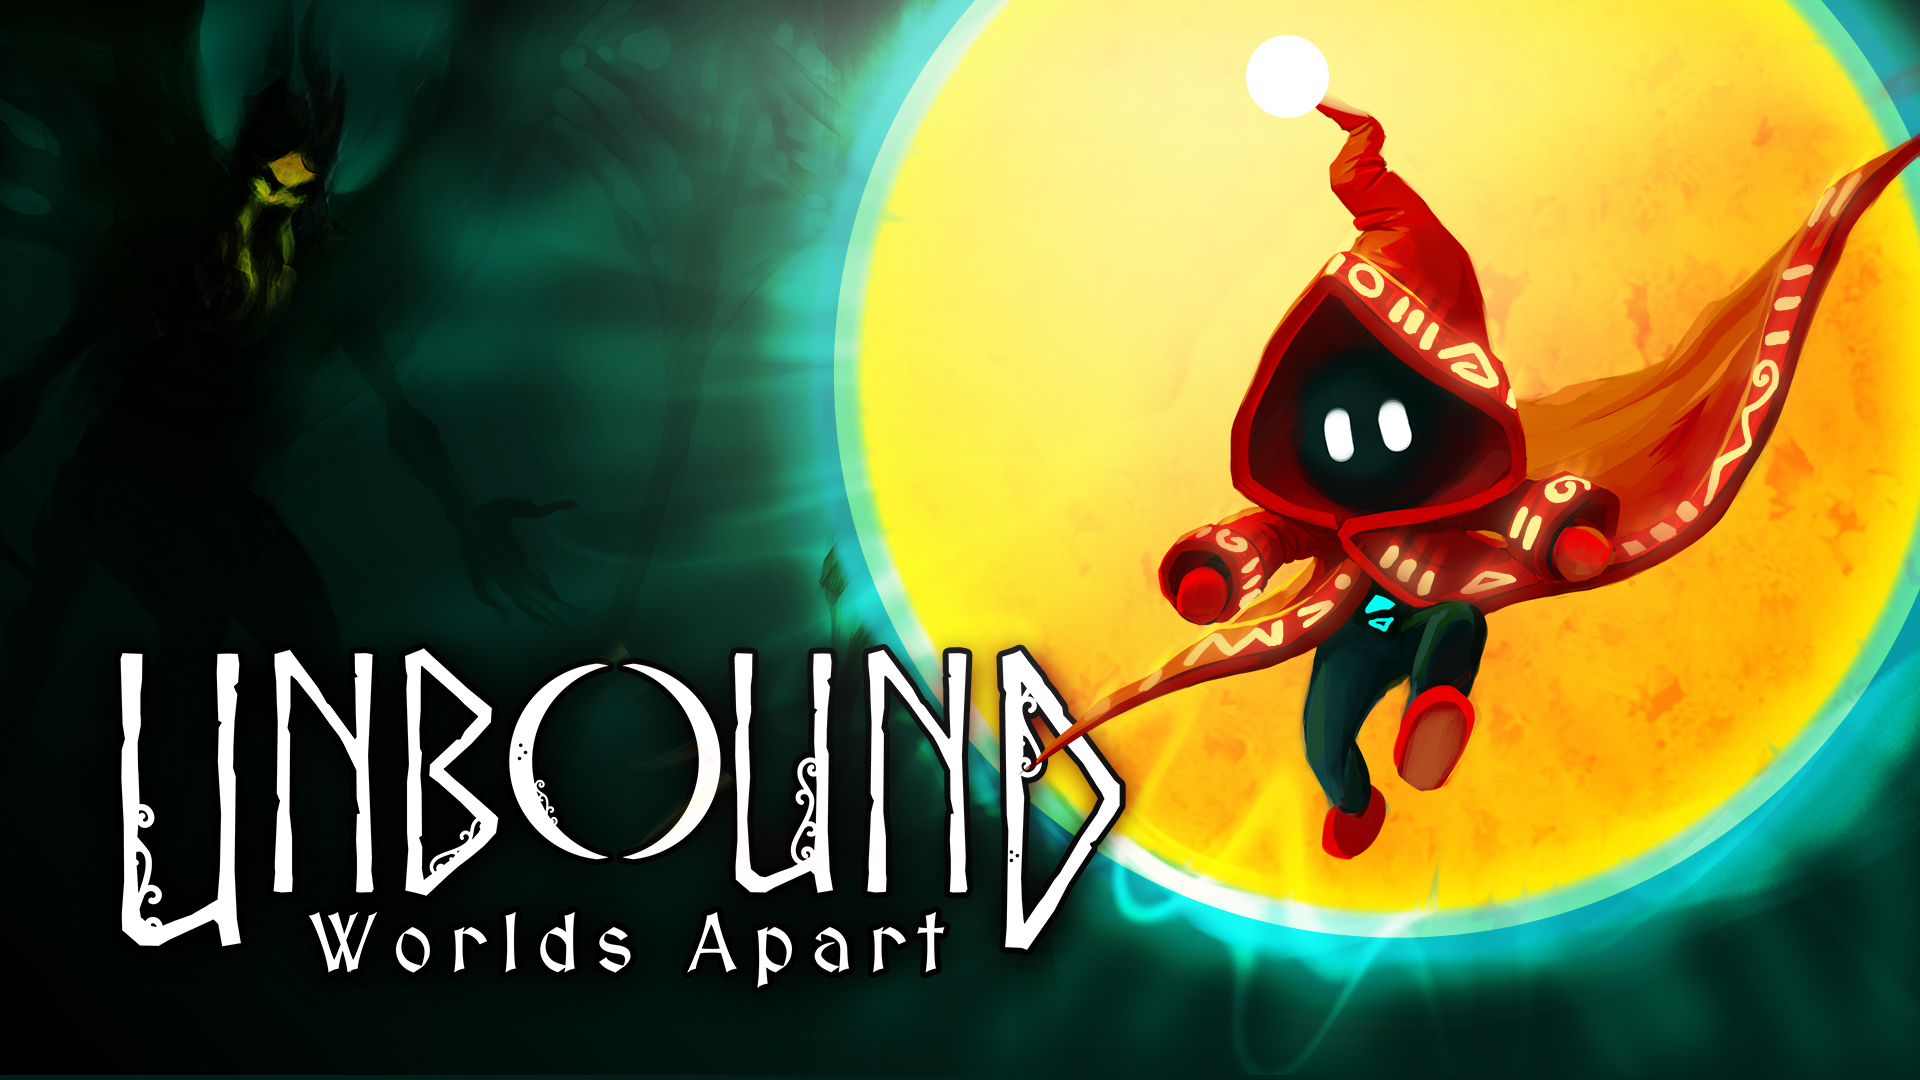 Unbound Worlds Apart Gaming Wallpapers